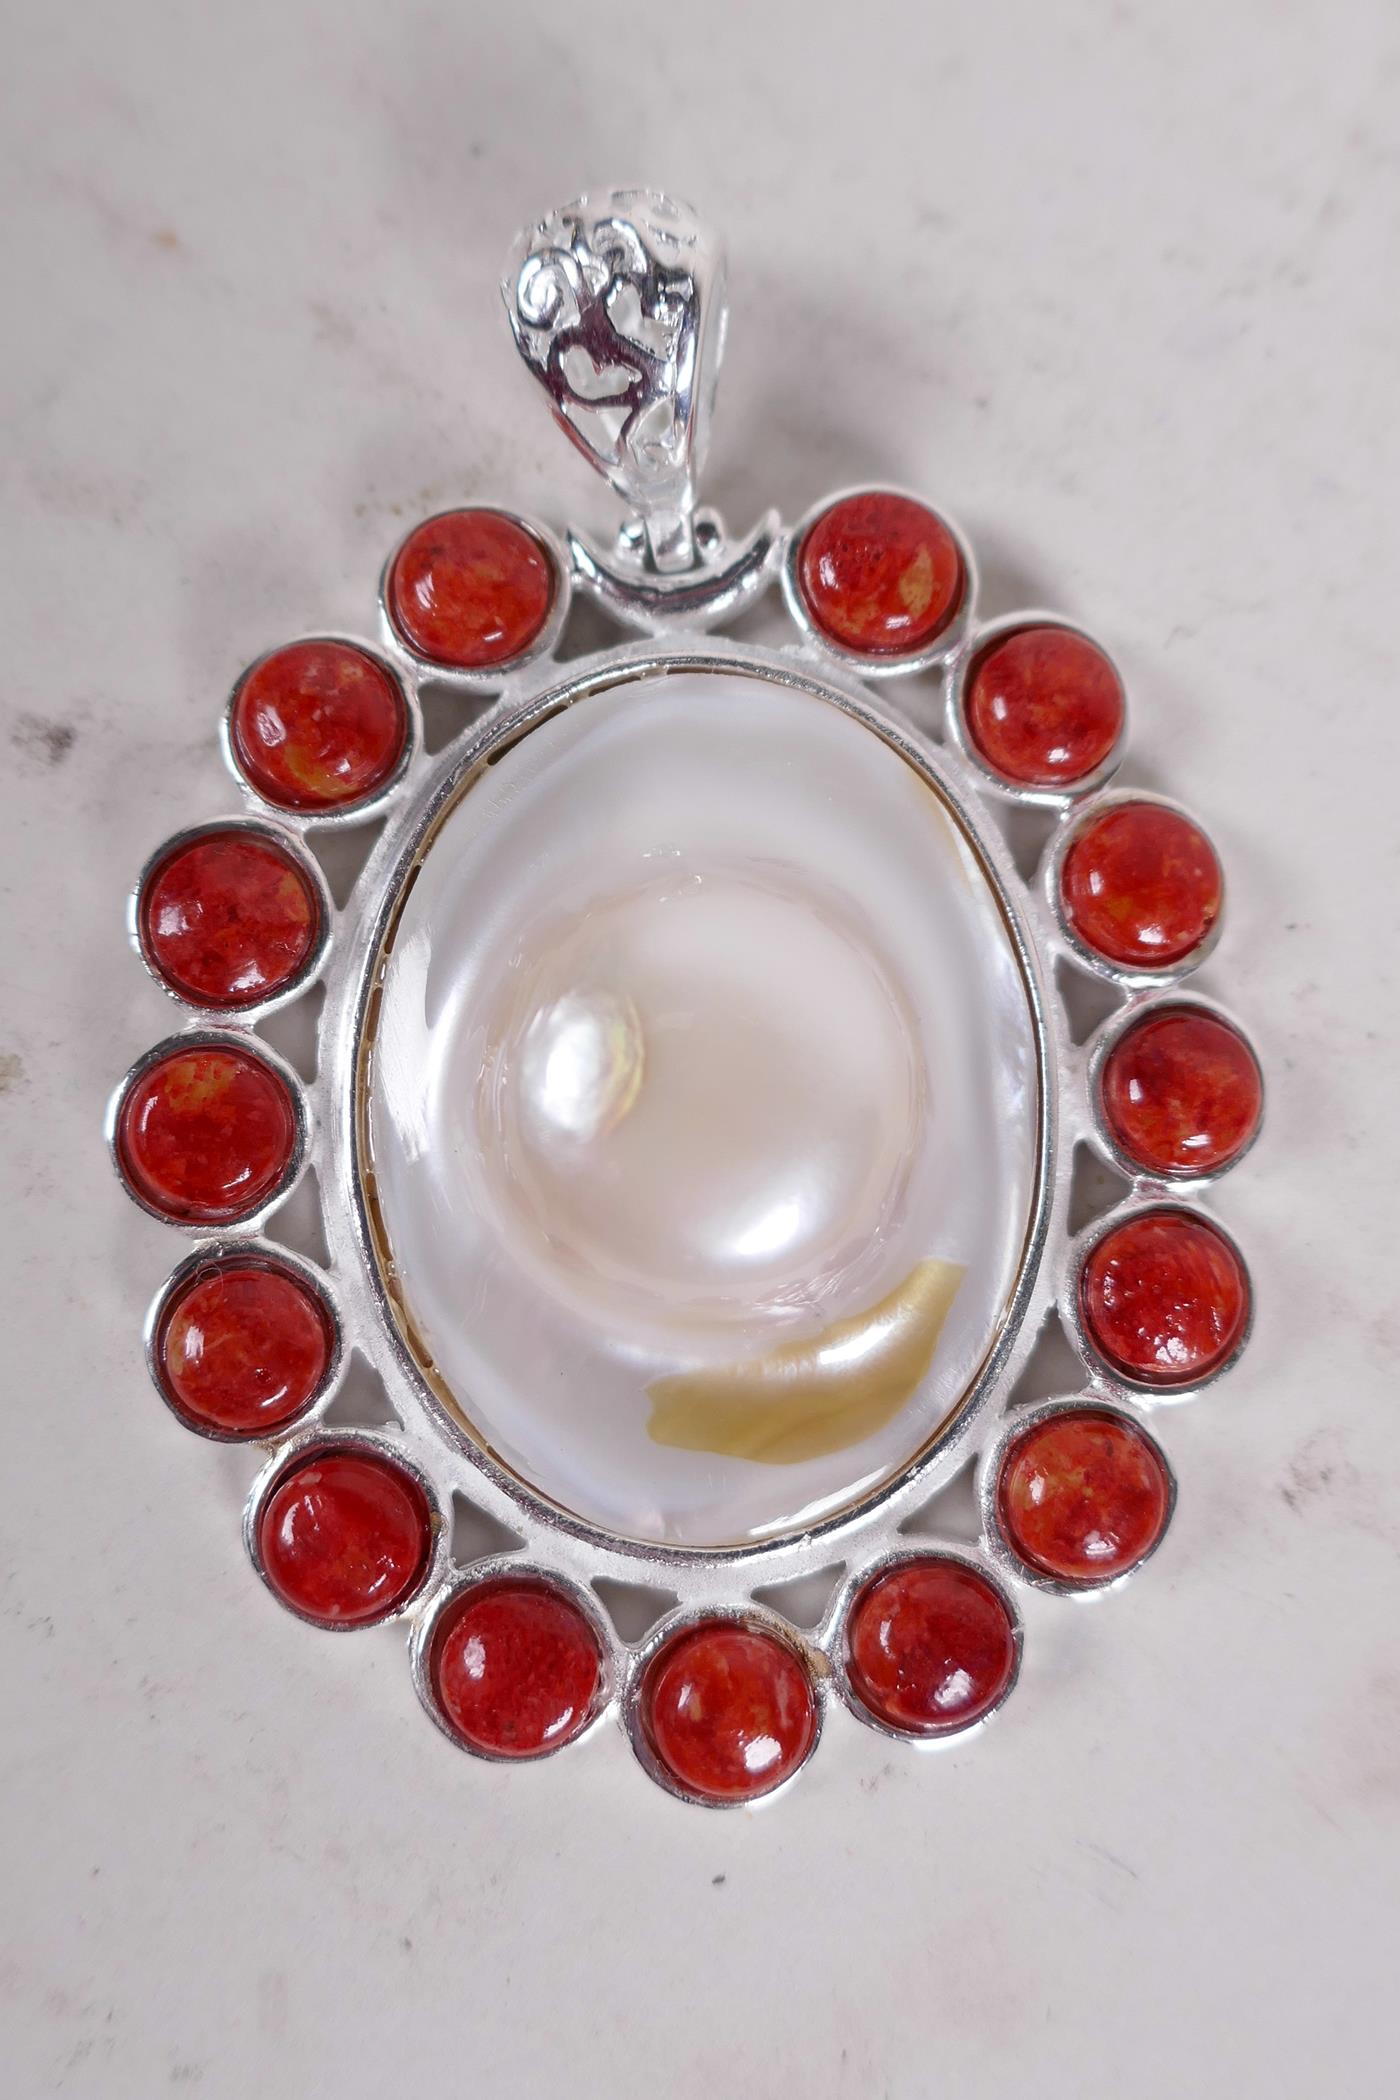 An oval mother of pearl and coral set pendant, 2½" long